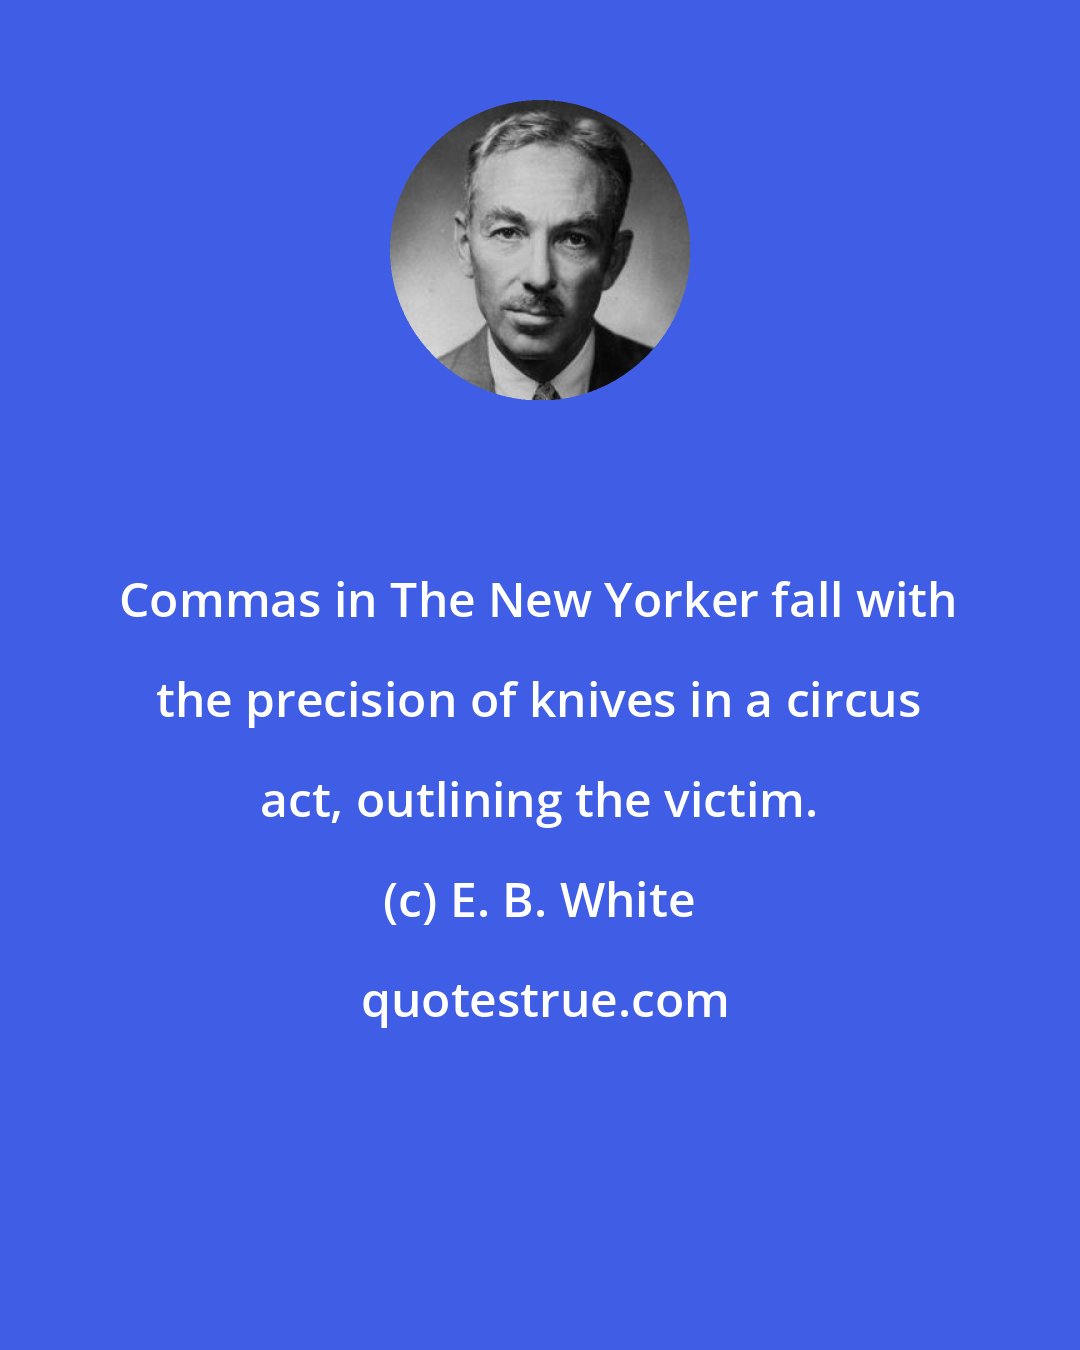 E. B. White: Commas in The New Yorker fall with the precision of knives in a circus act, outlining the victim.